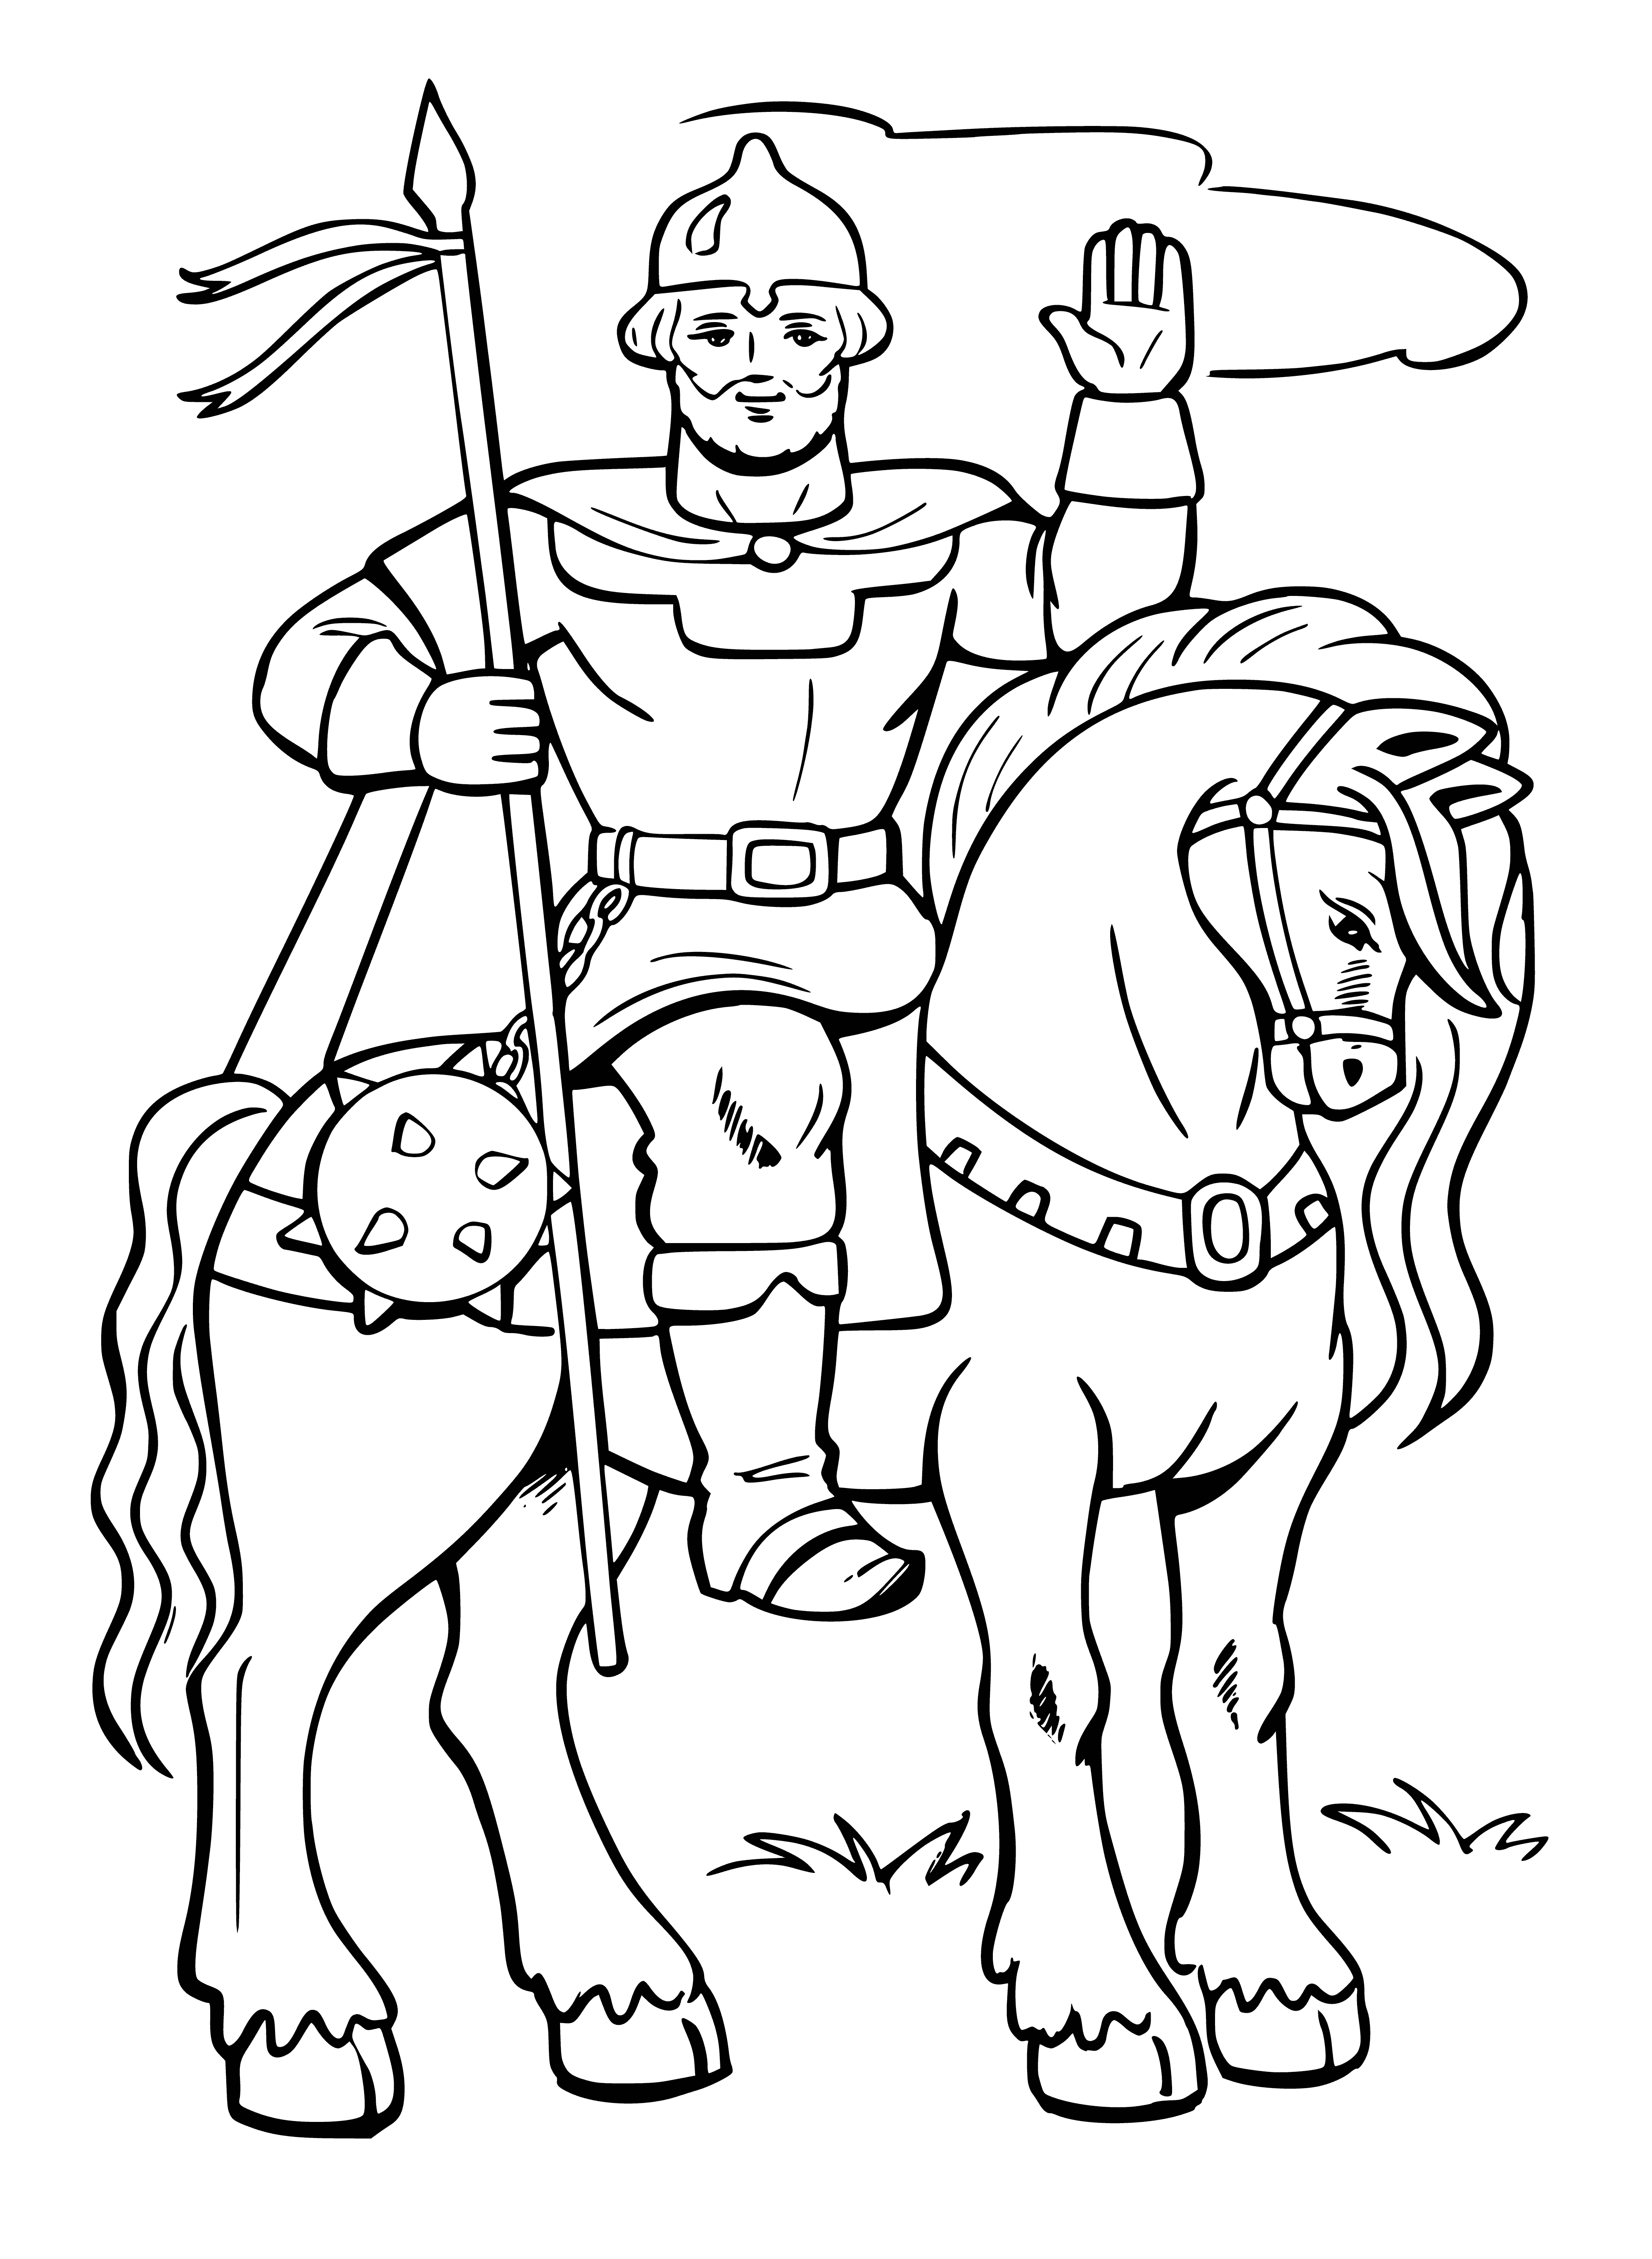 coloring page: Large man in armor, sword in hand, surrounded by scared people. Ready to fight. #coloringpage